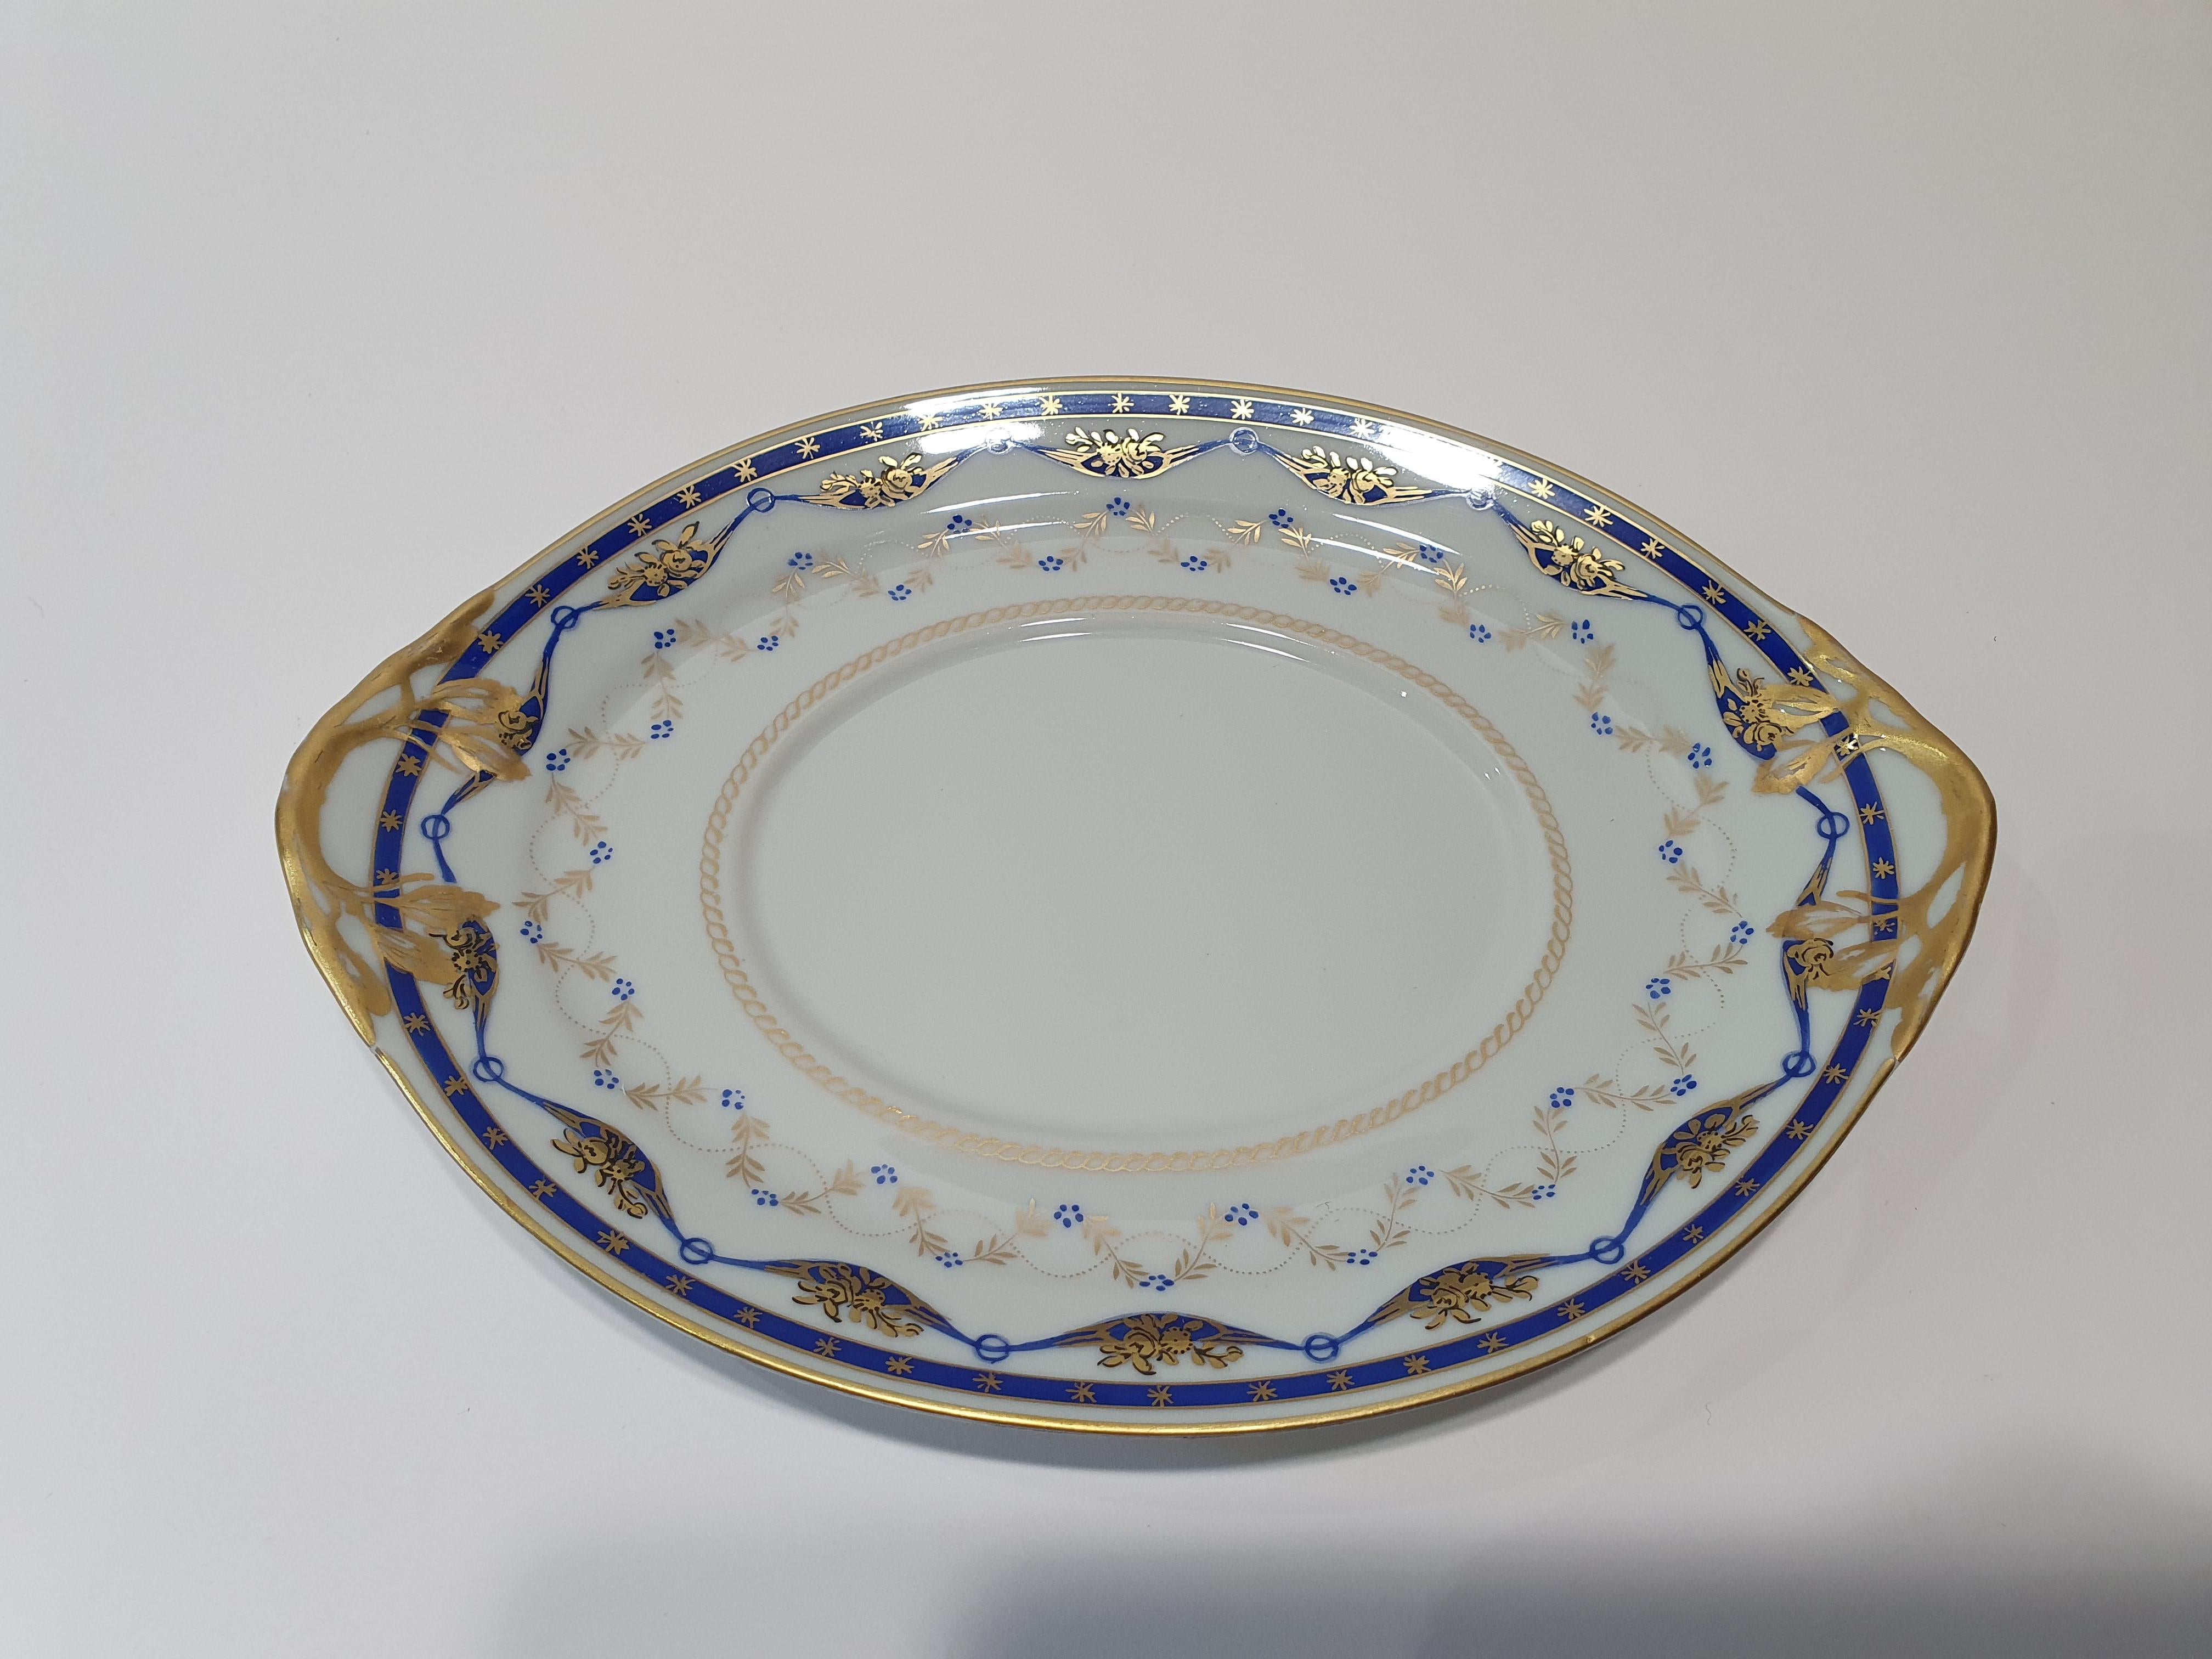 Circa 1980.
Magnificent collectible sauce tureen and saucer in portuguese porcelain Vista Alegre, with hand painted flowers, leaves, festoons and stars in cobalt blue and twenty-two carat gold.
Vista Alegre was founded in 1824 by Josè Ferreira